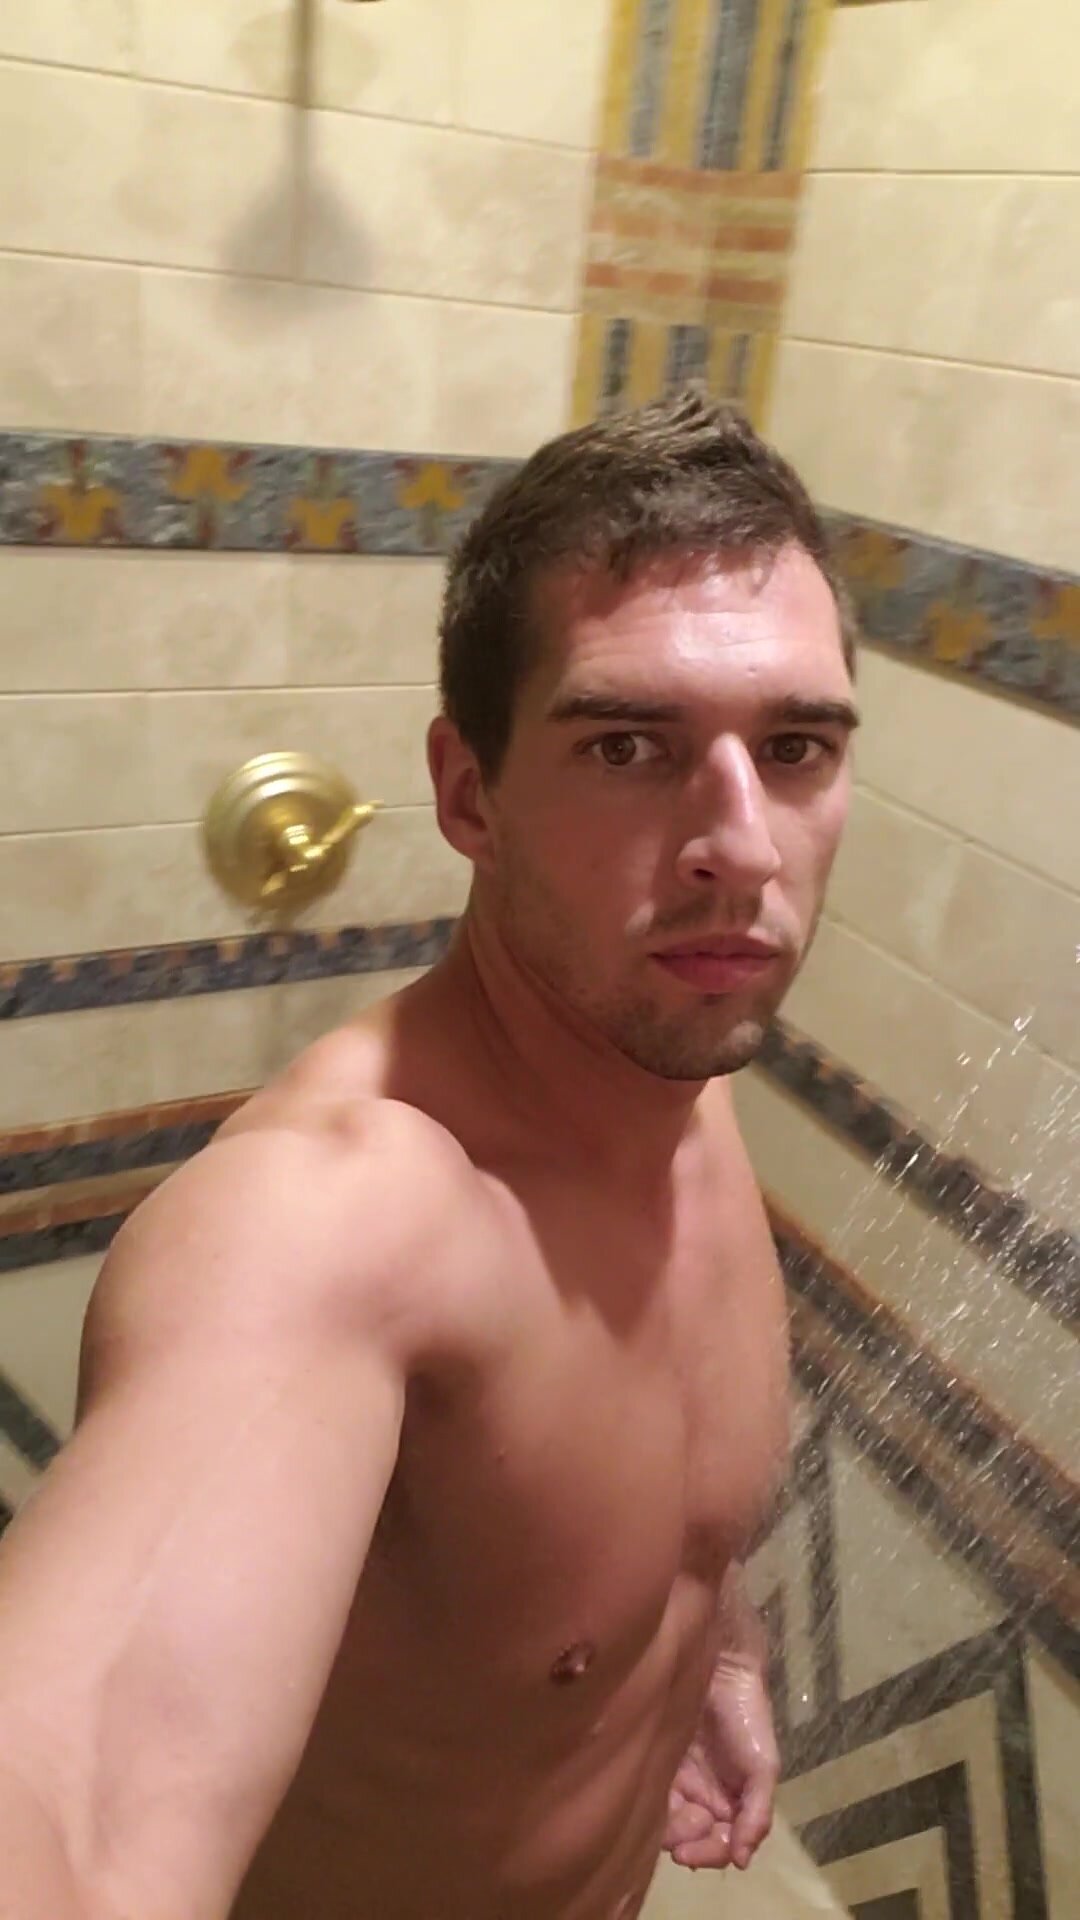 GREAT MUSCLE TOM IN THE SHOWER